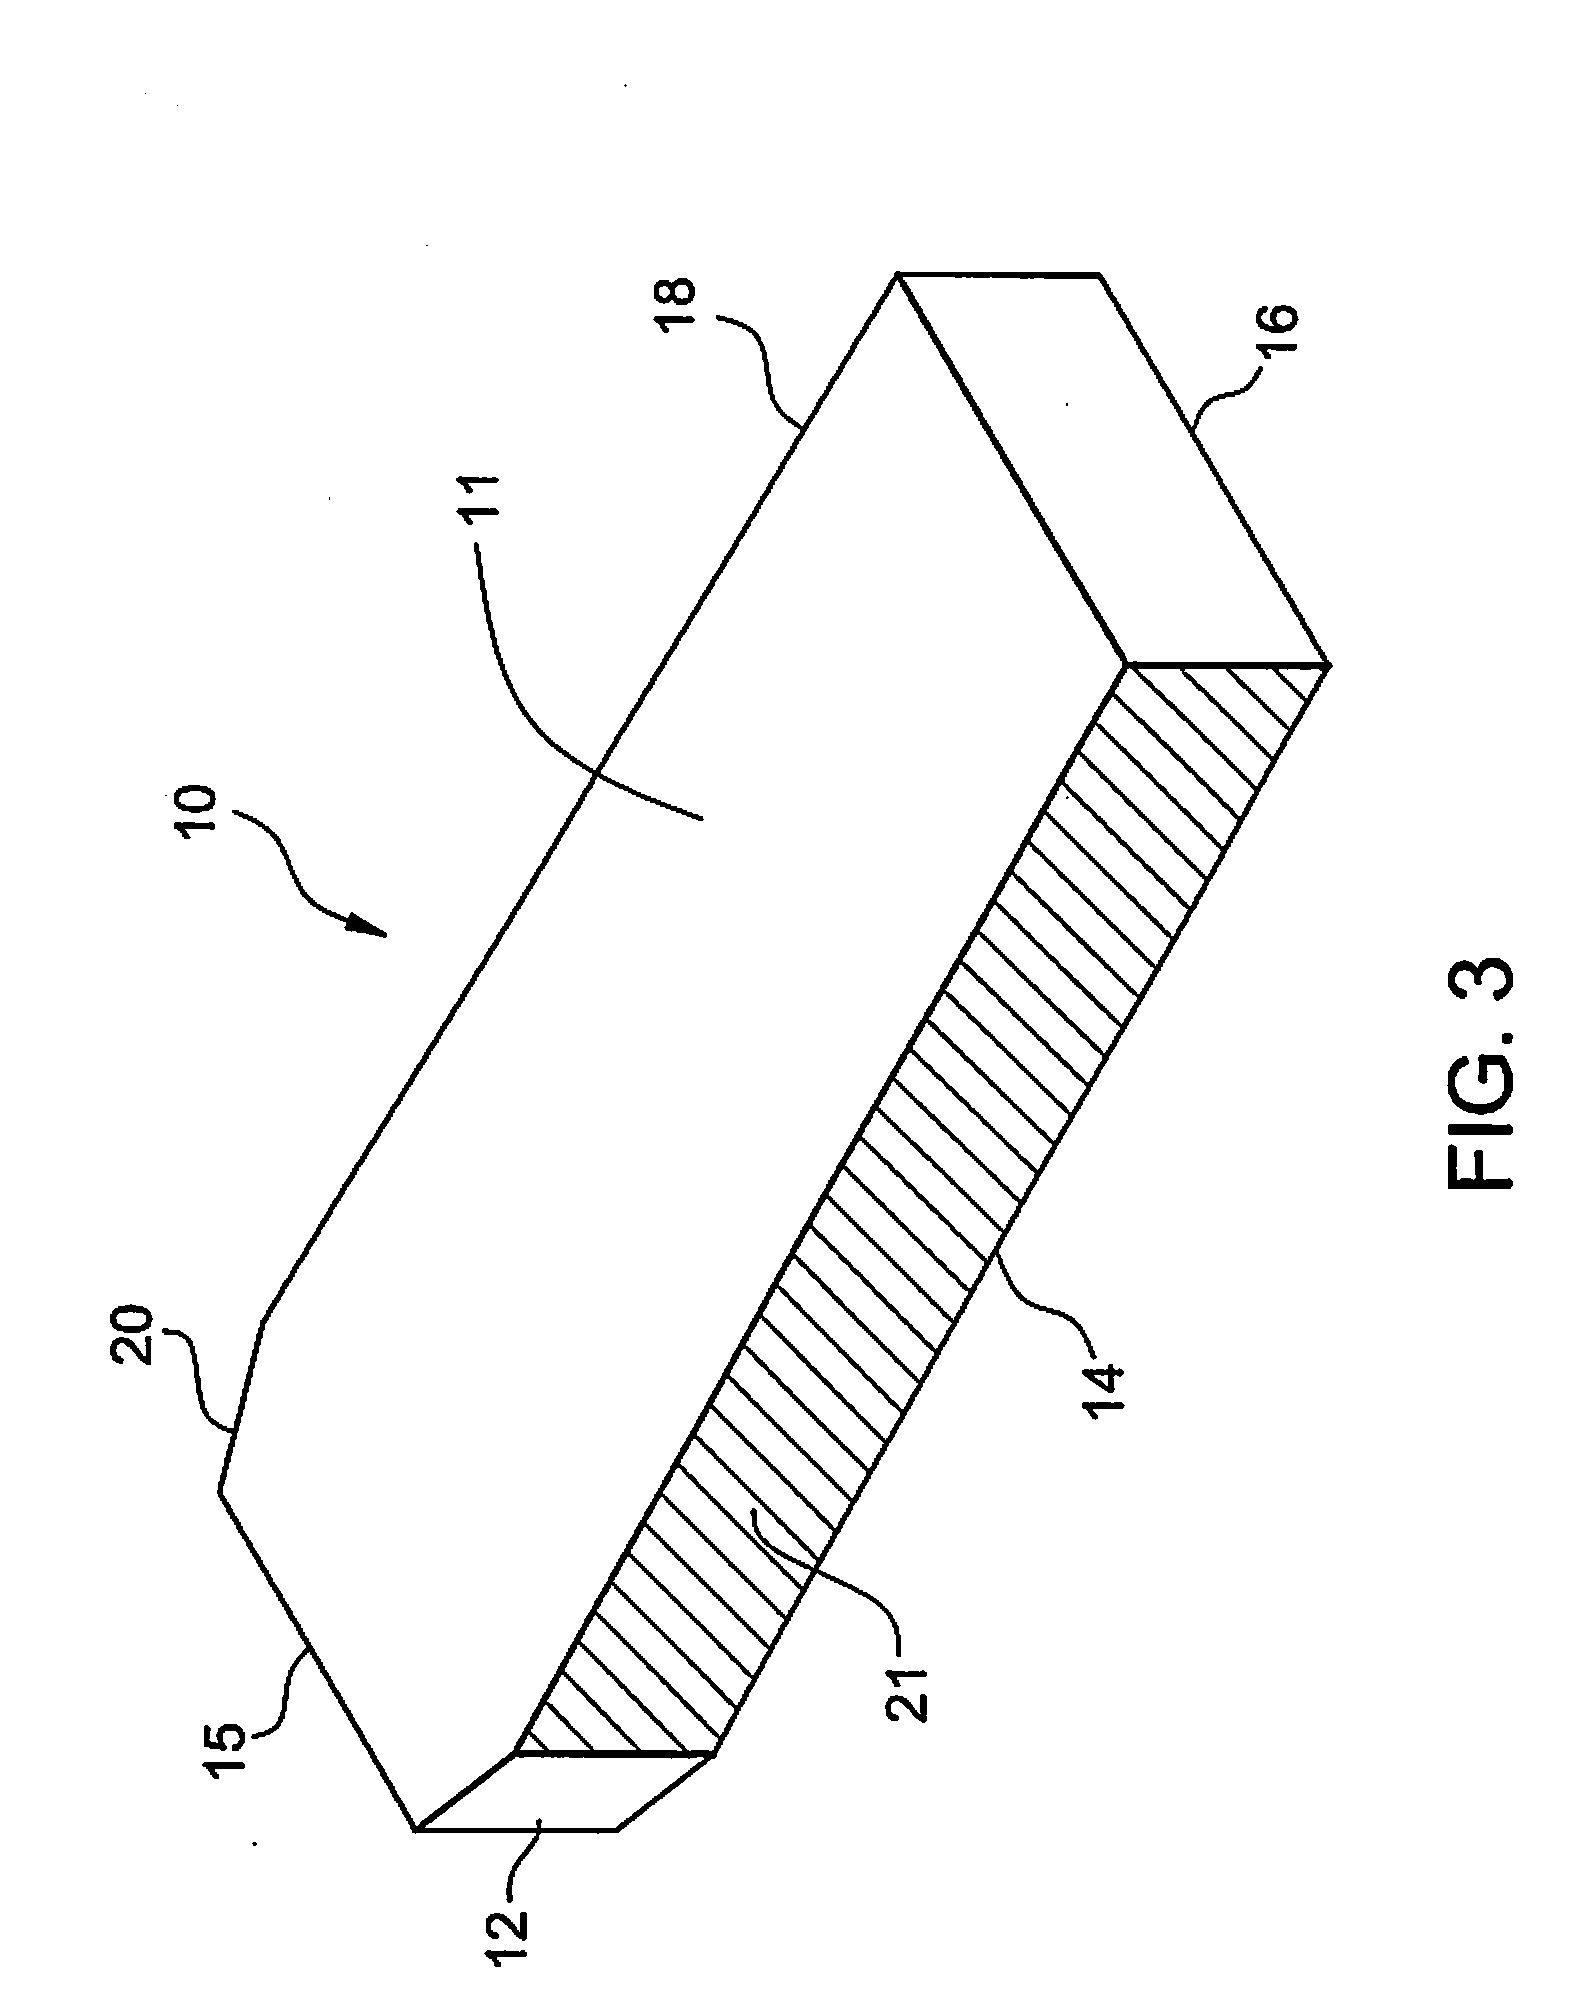 Solid-state laser gain module